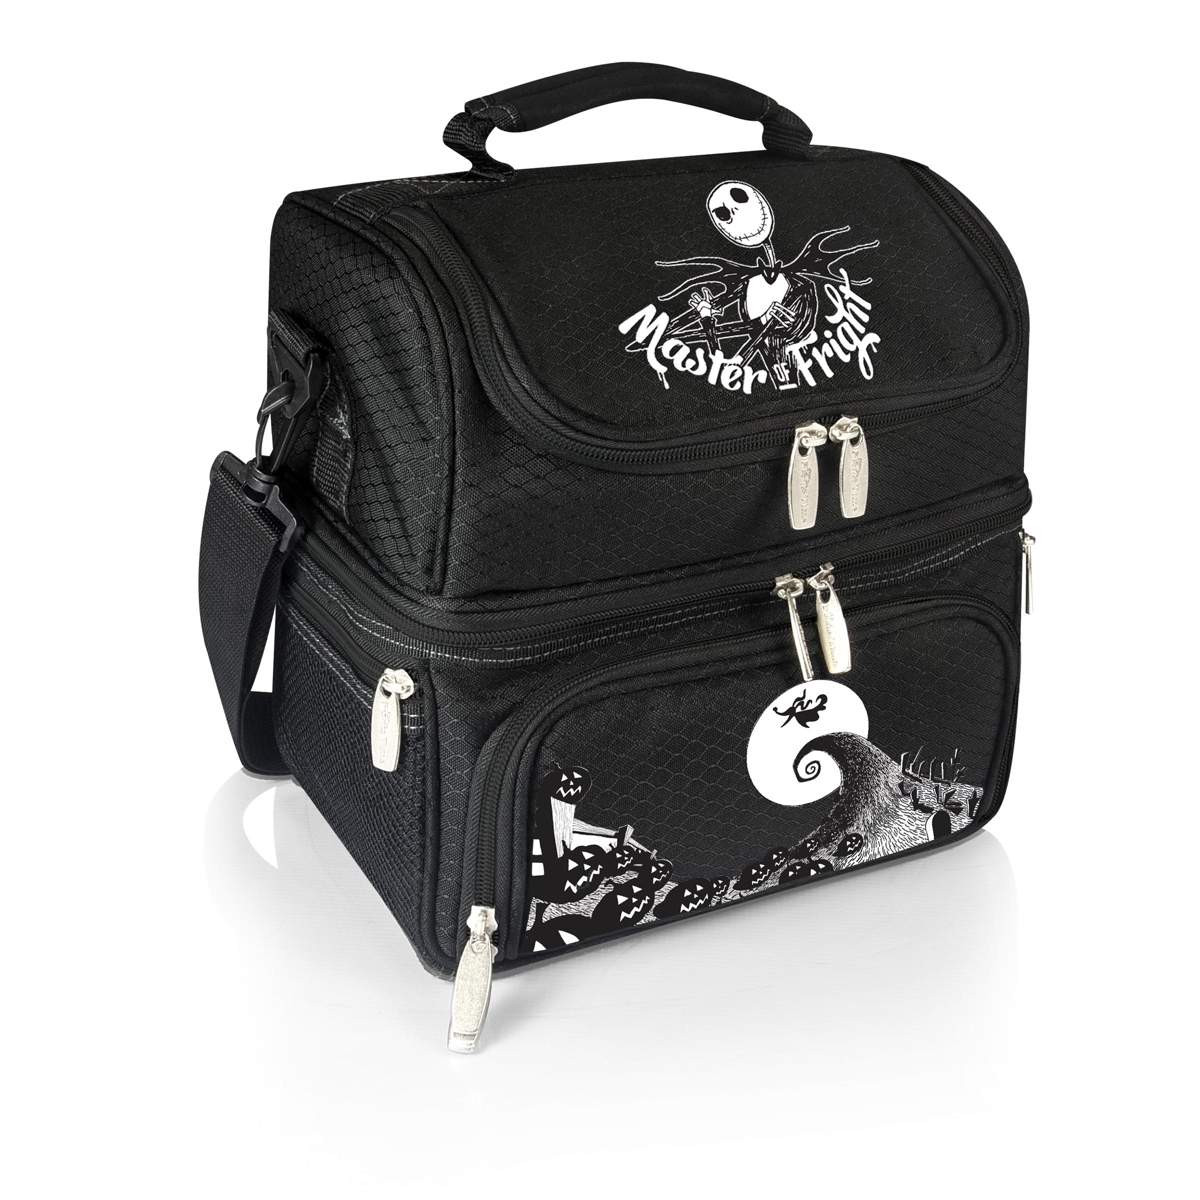 Disney's The Nightmare Before Christmas Pranzo Lunch Tote - Black